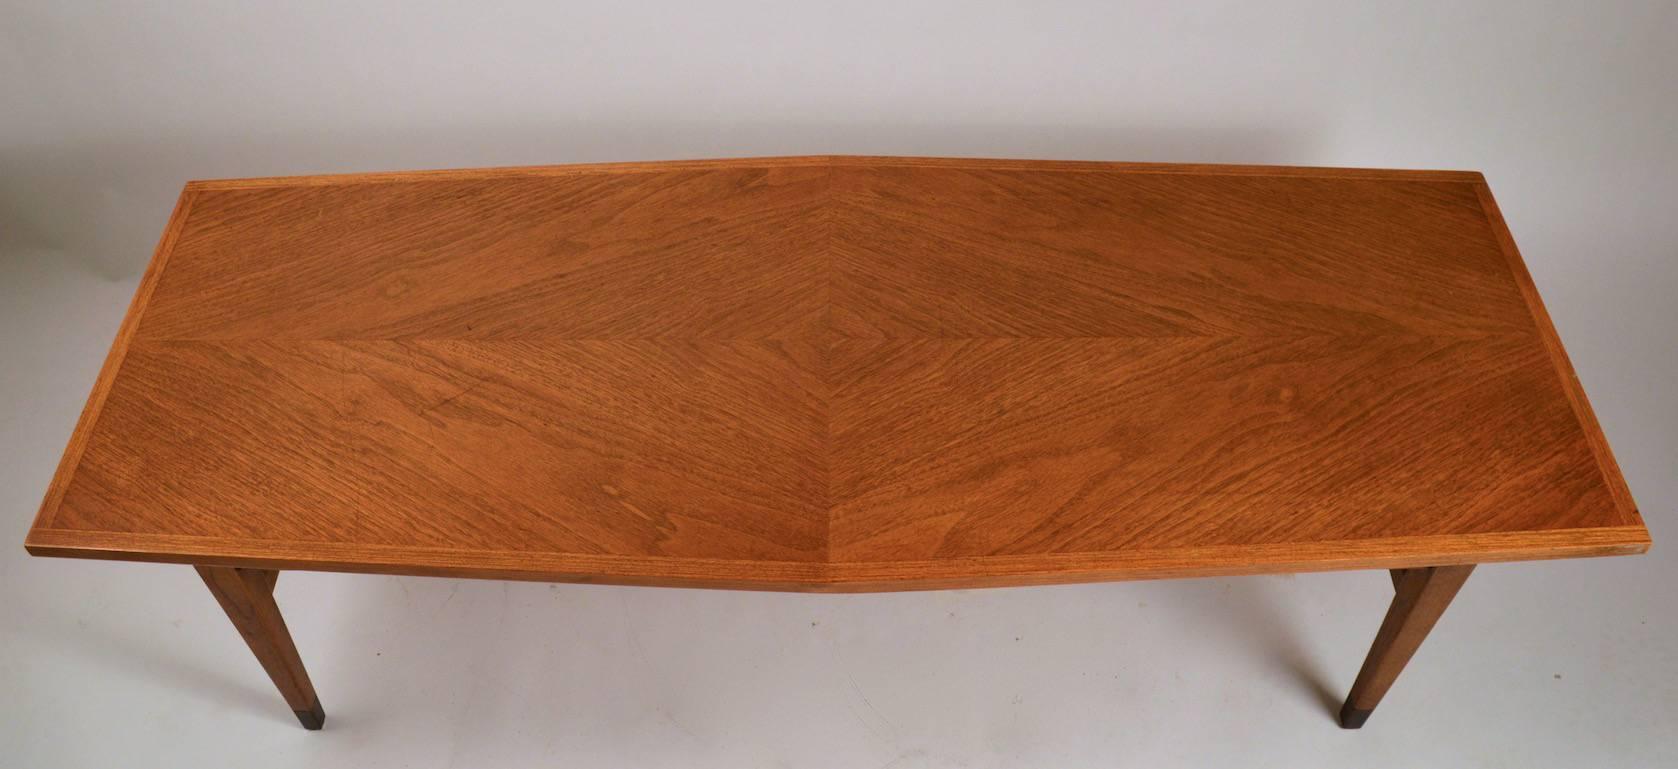 American Six Sided Mid-Century Coffee Table